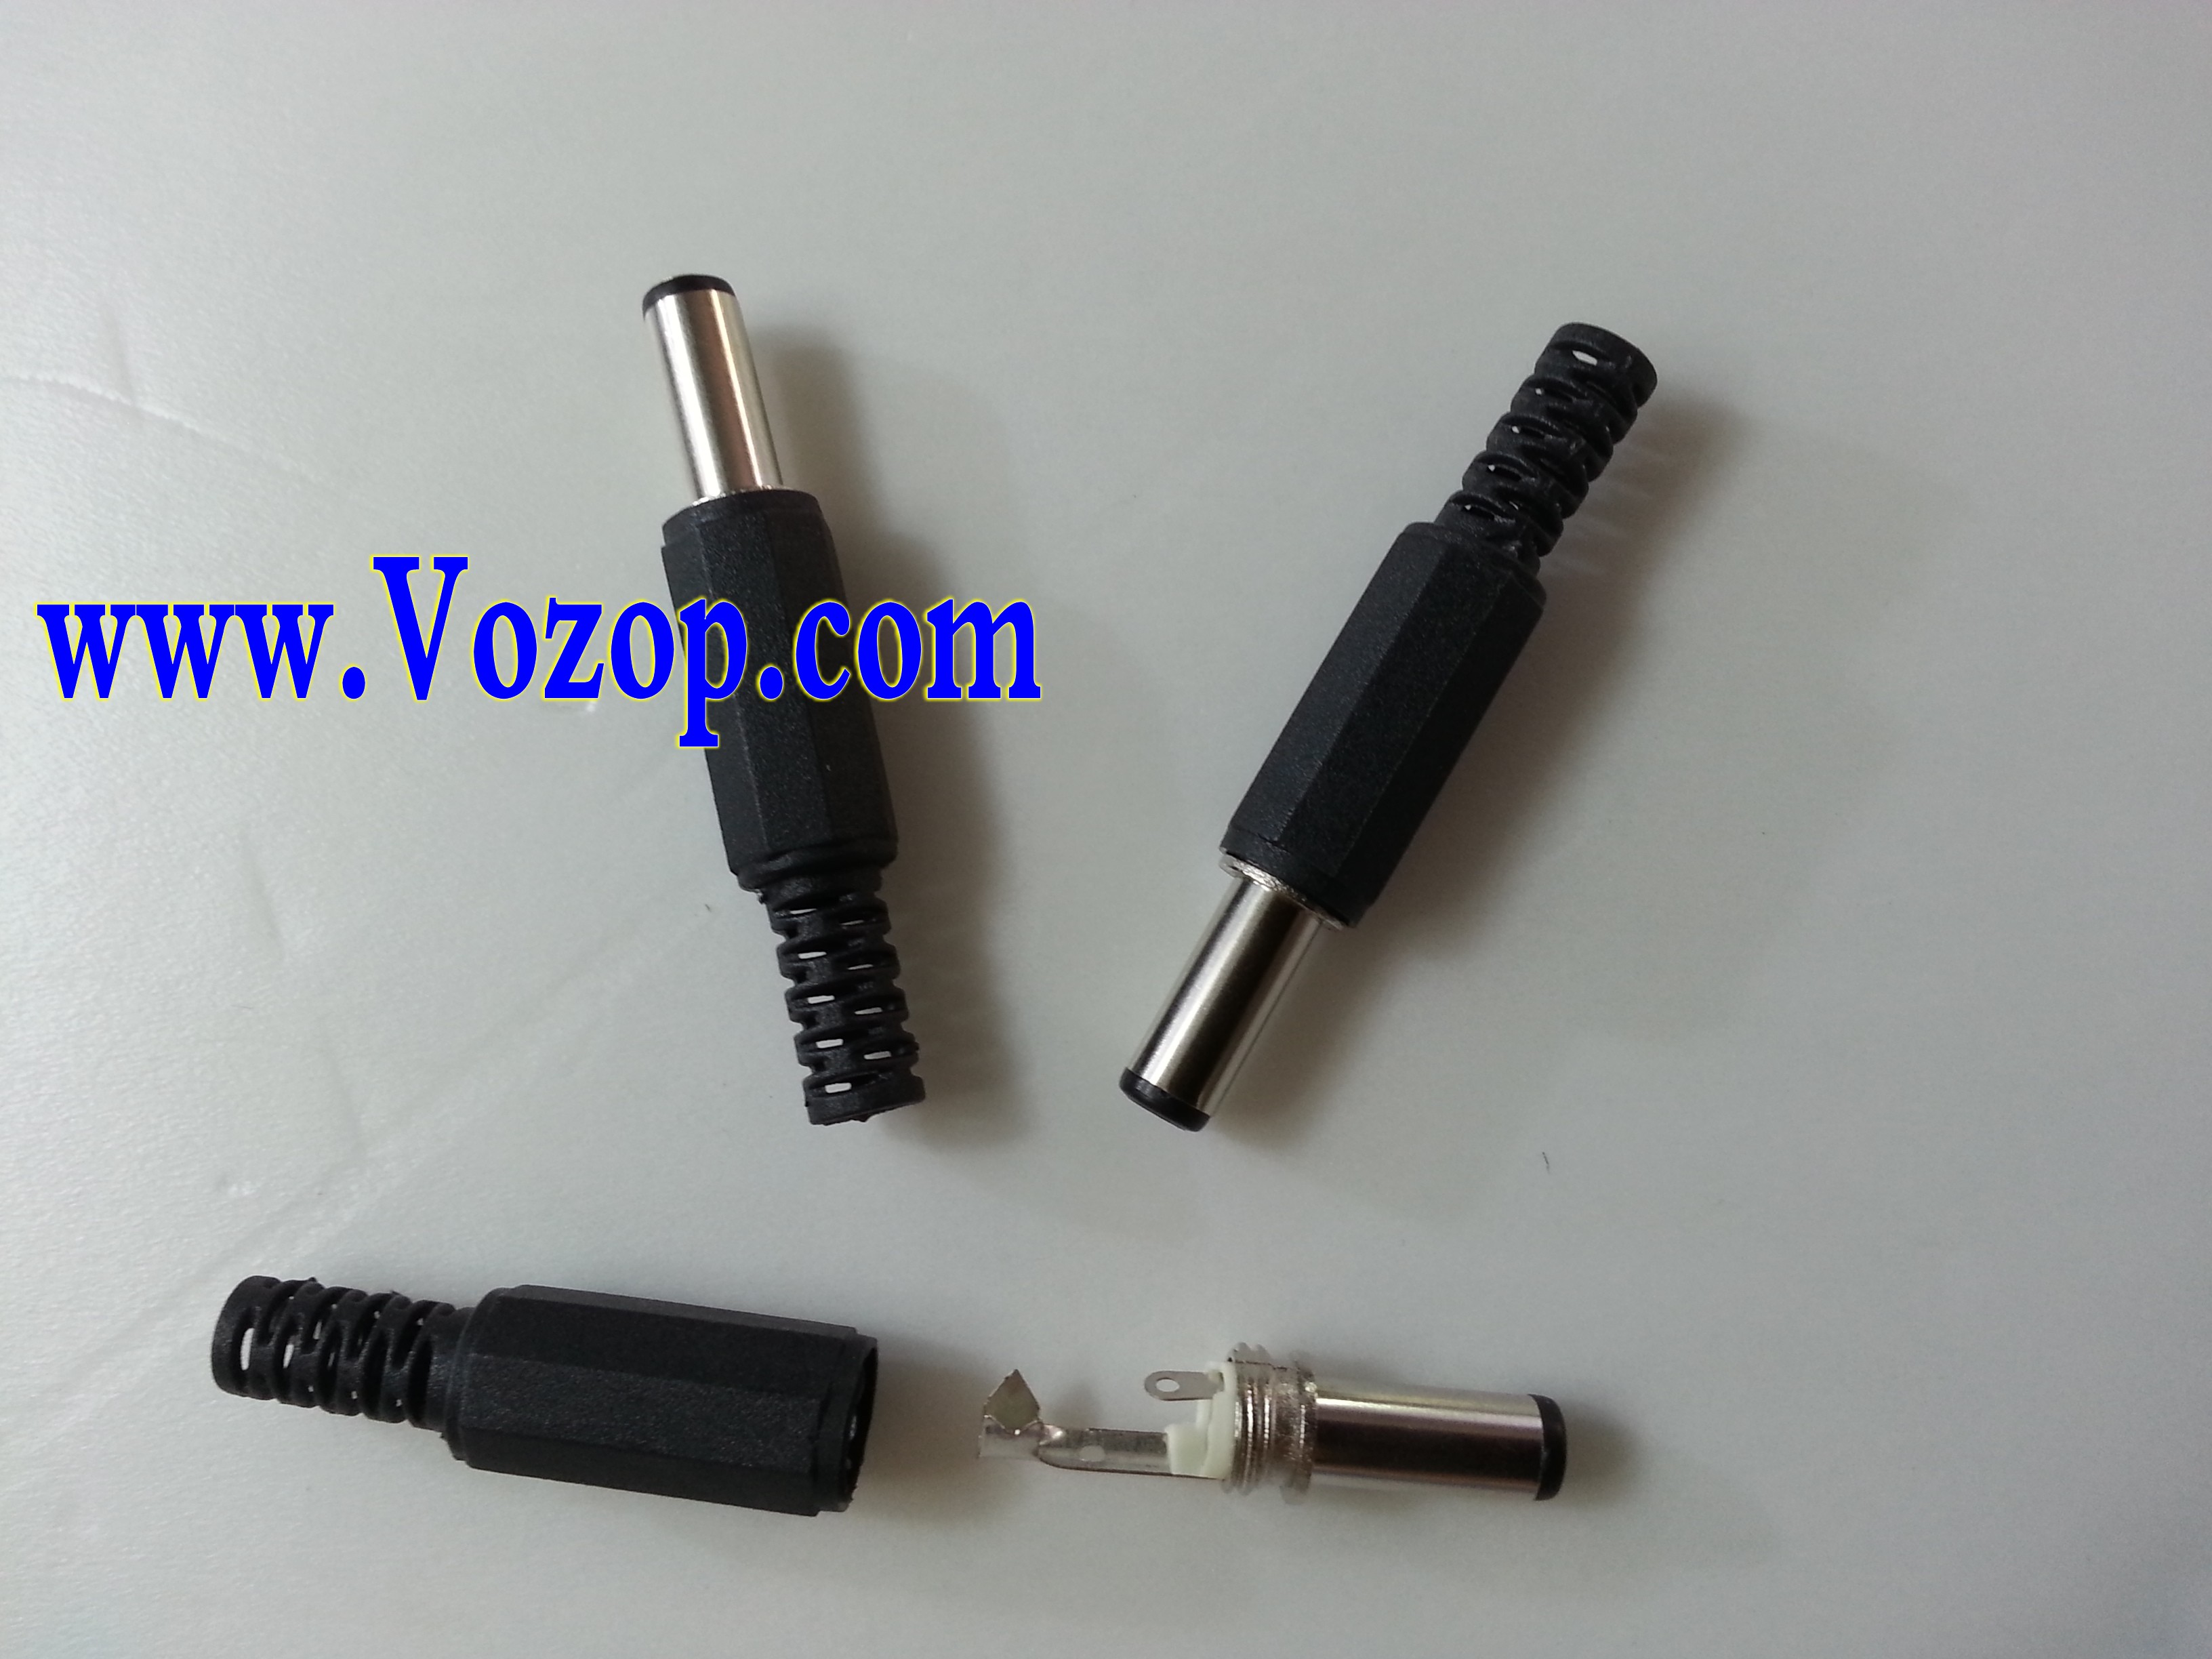 5.5mm_2.1mm_DC_Power_Cable_Male_Plug_Connect_Socket